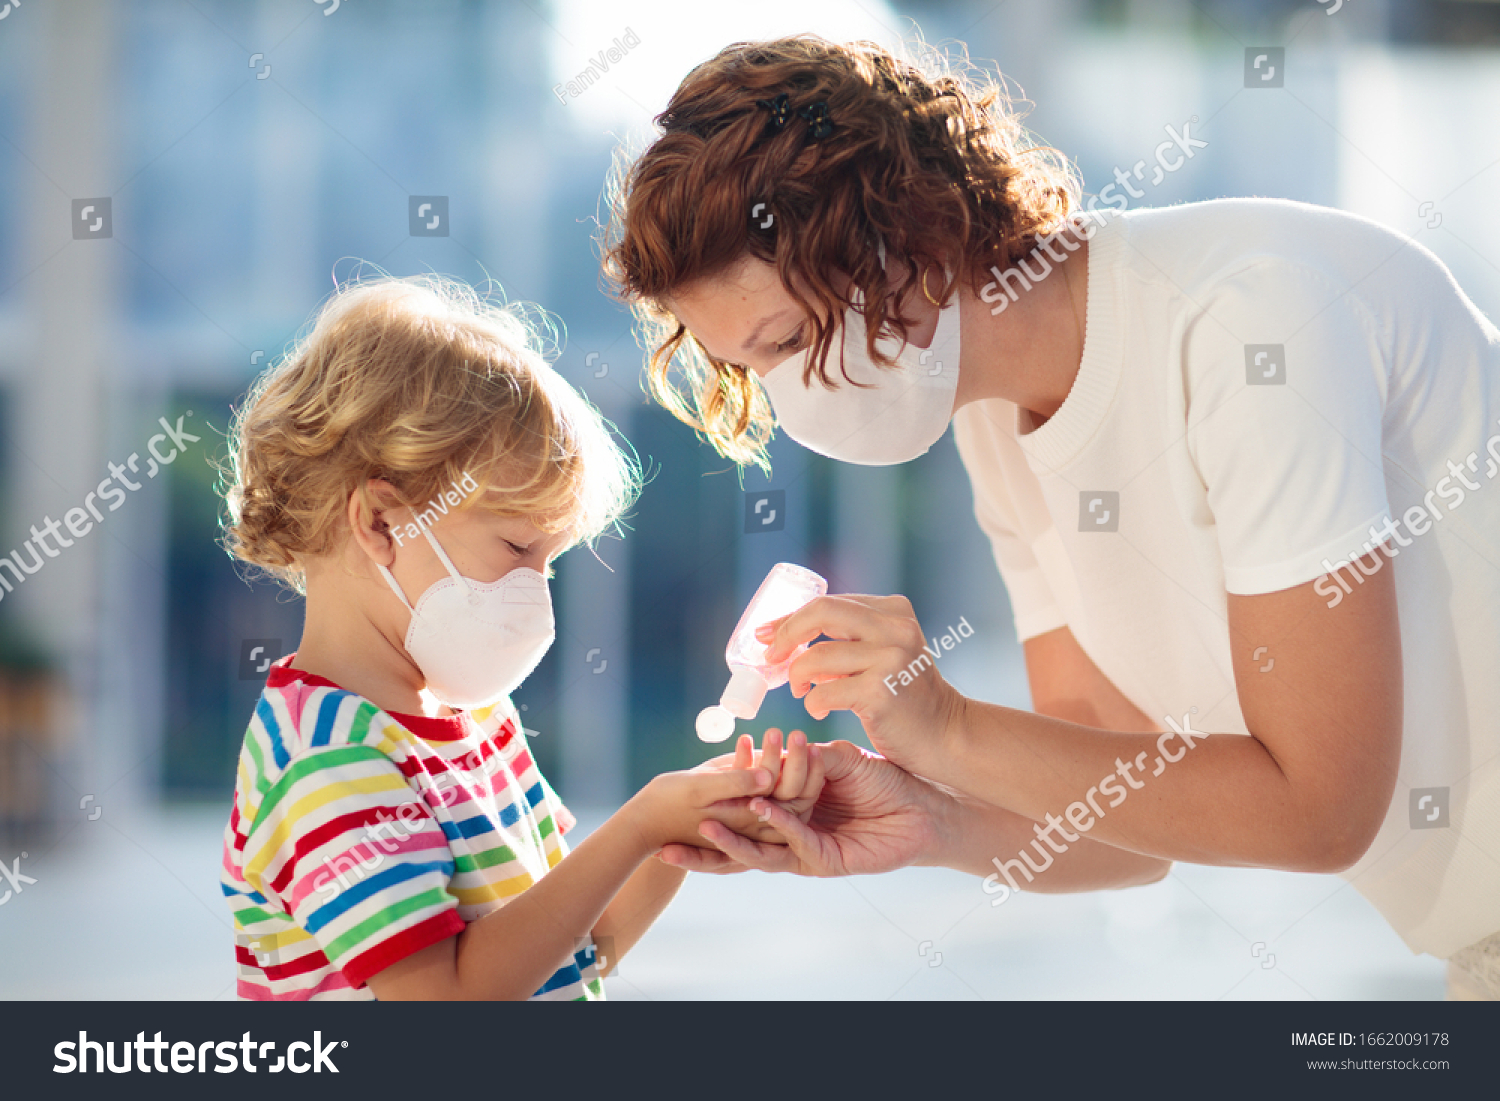 Family with kids in face mask in shopping mall or airport. Mother and child wear facemask during coronavirus and flu outbreak. Virus and illness protection, hand sanitizer in public crowded place. #1662009178